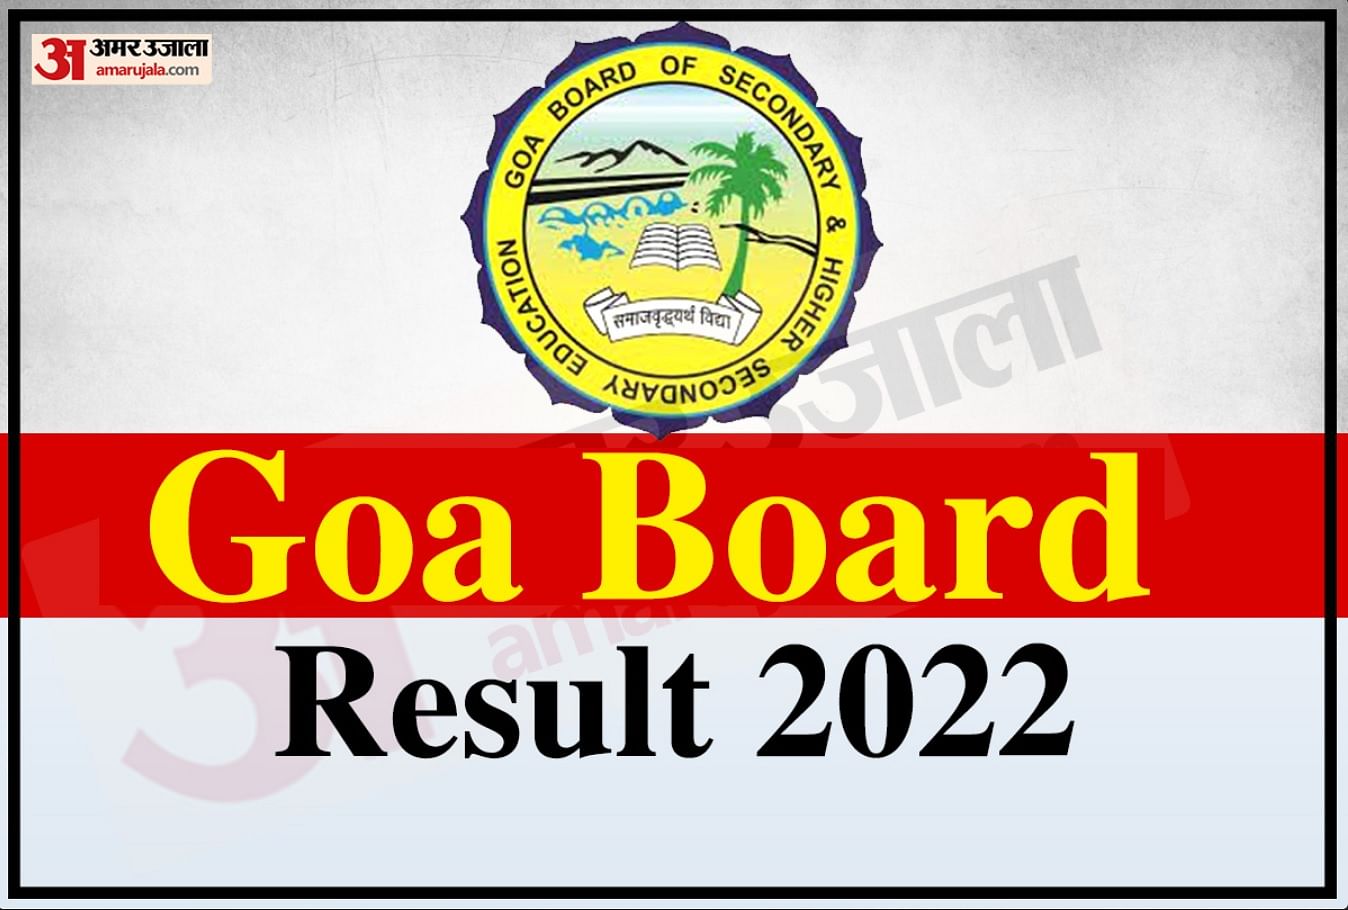 Goa Board SSC Result 2022 Announced, Direct Link to Check Here